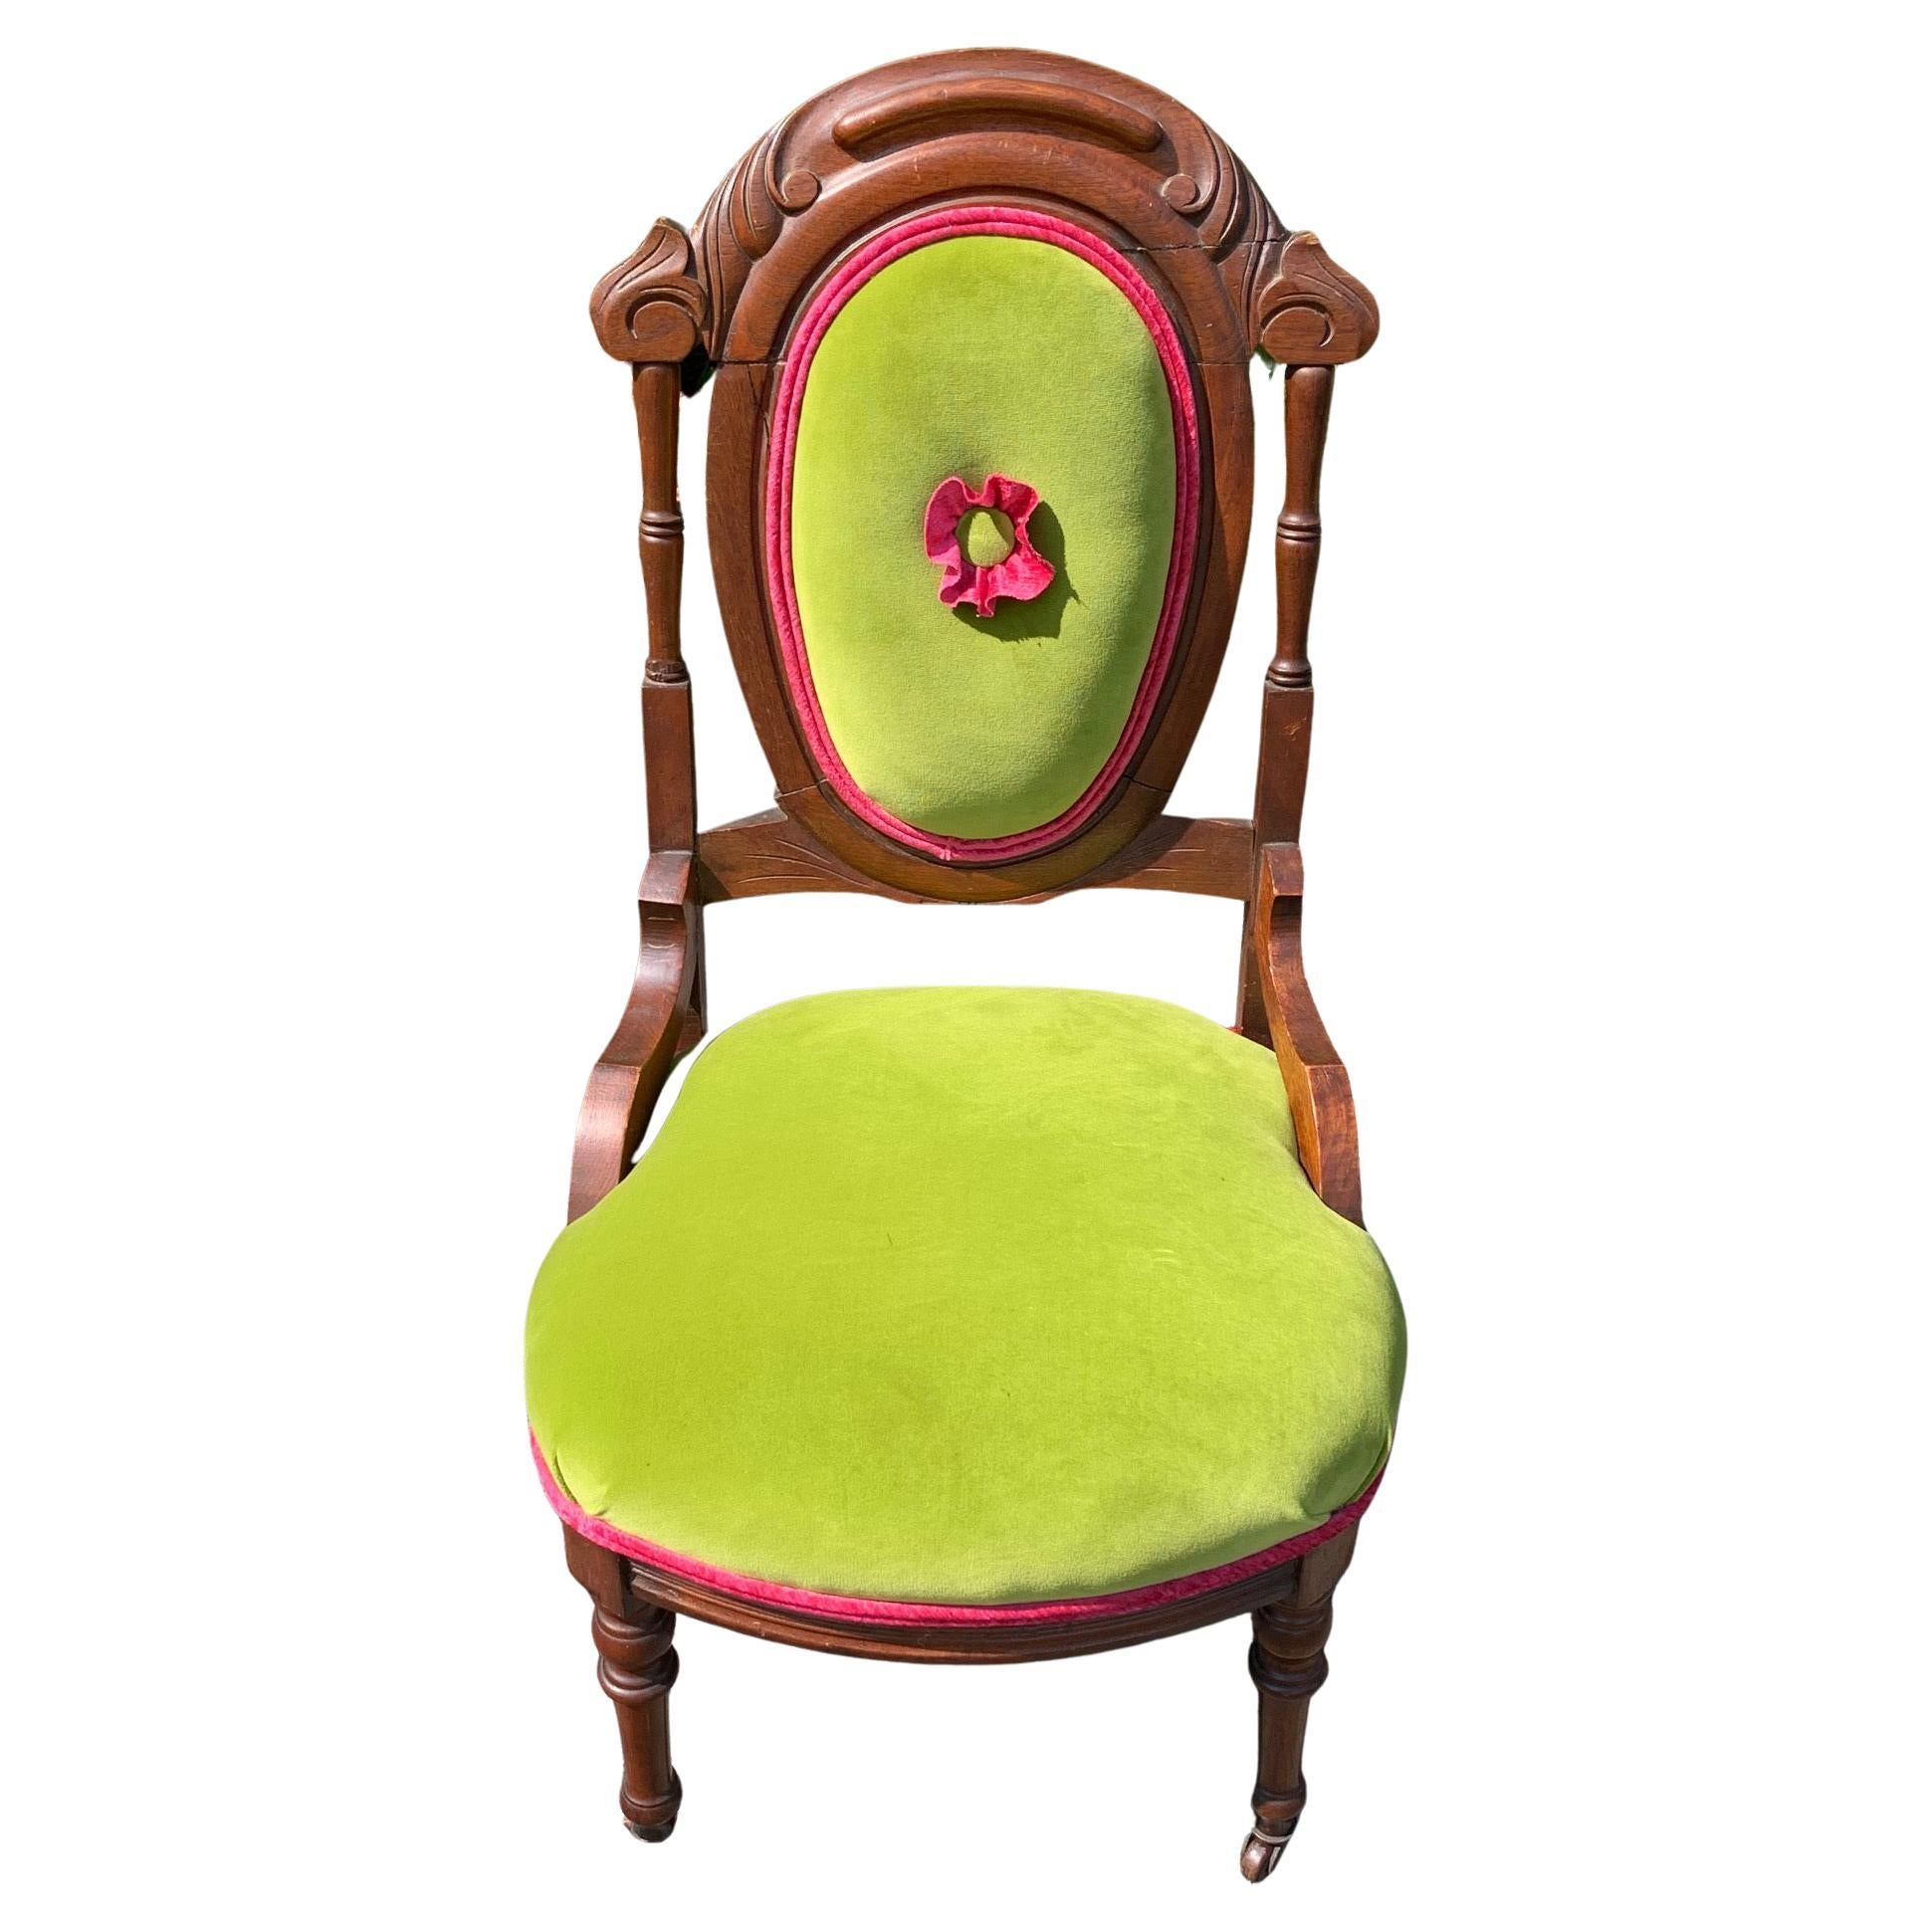 Sassy Little Occasional Chair in Chartreuse